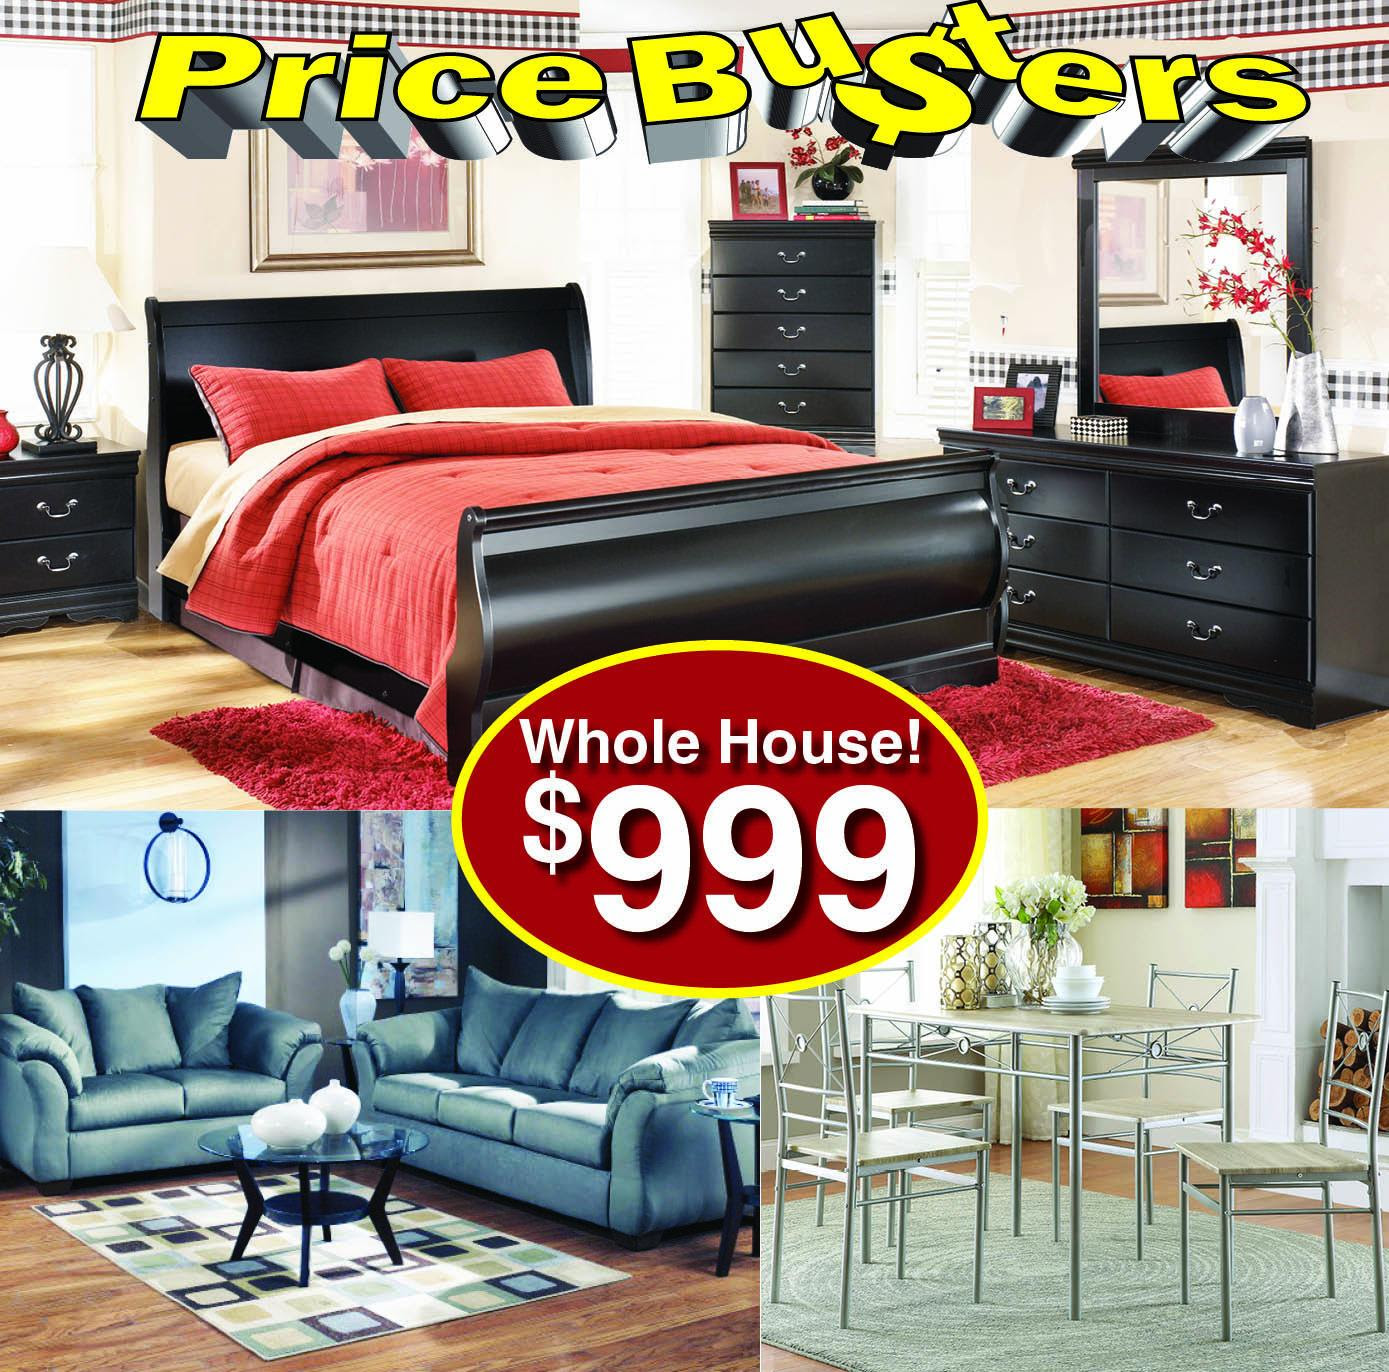 Price Busters Discount Furniture Furniture Store Forestville Md 20747